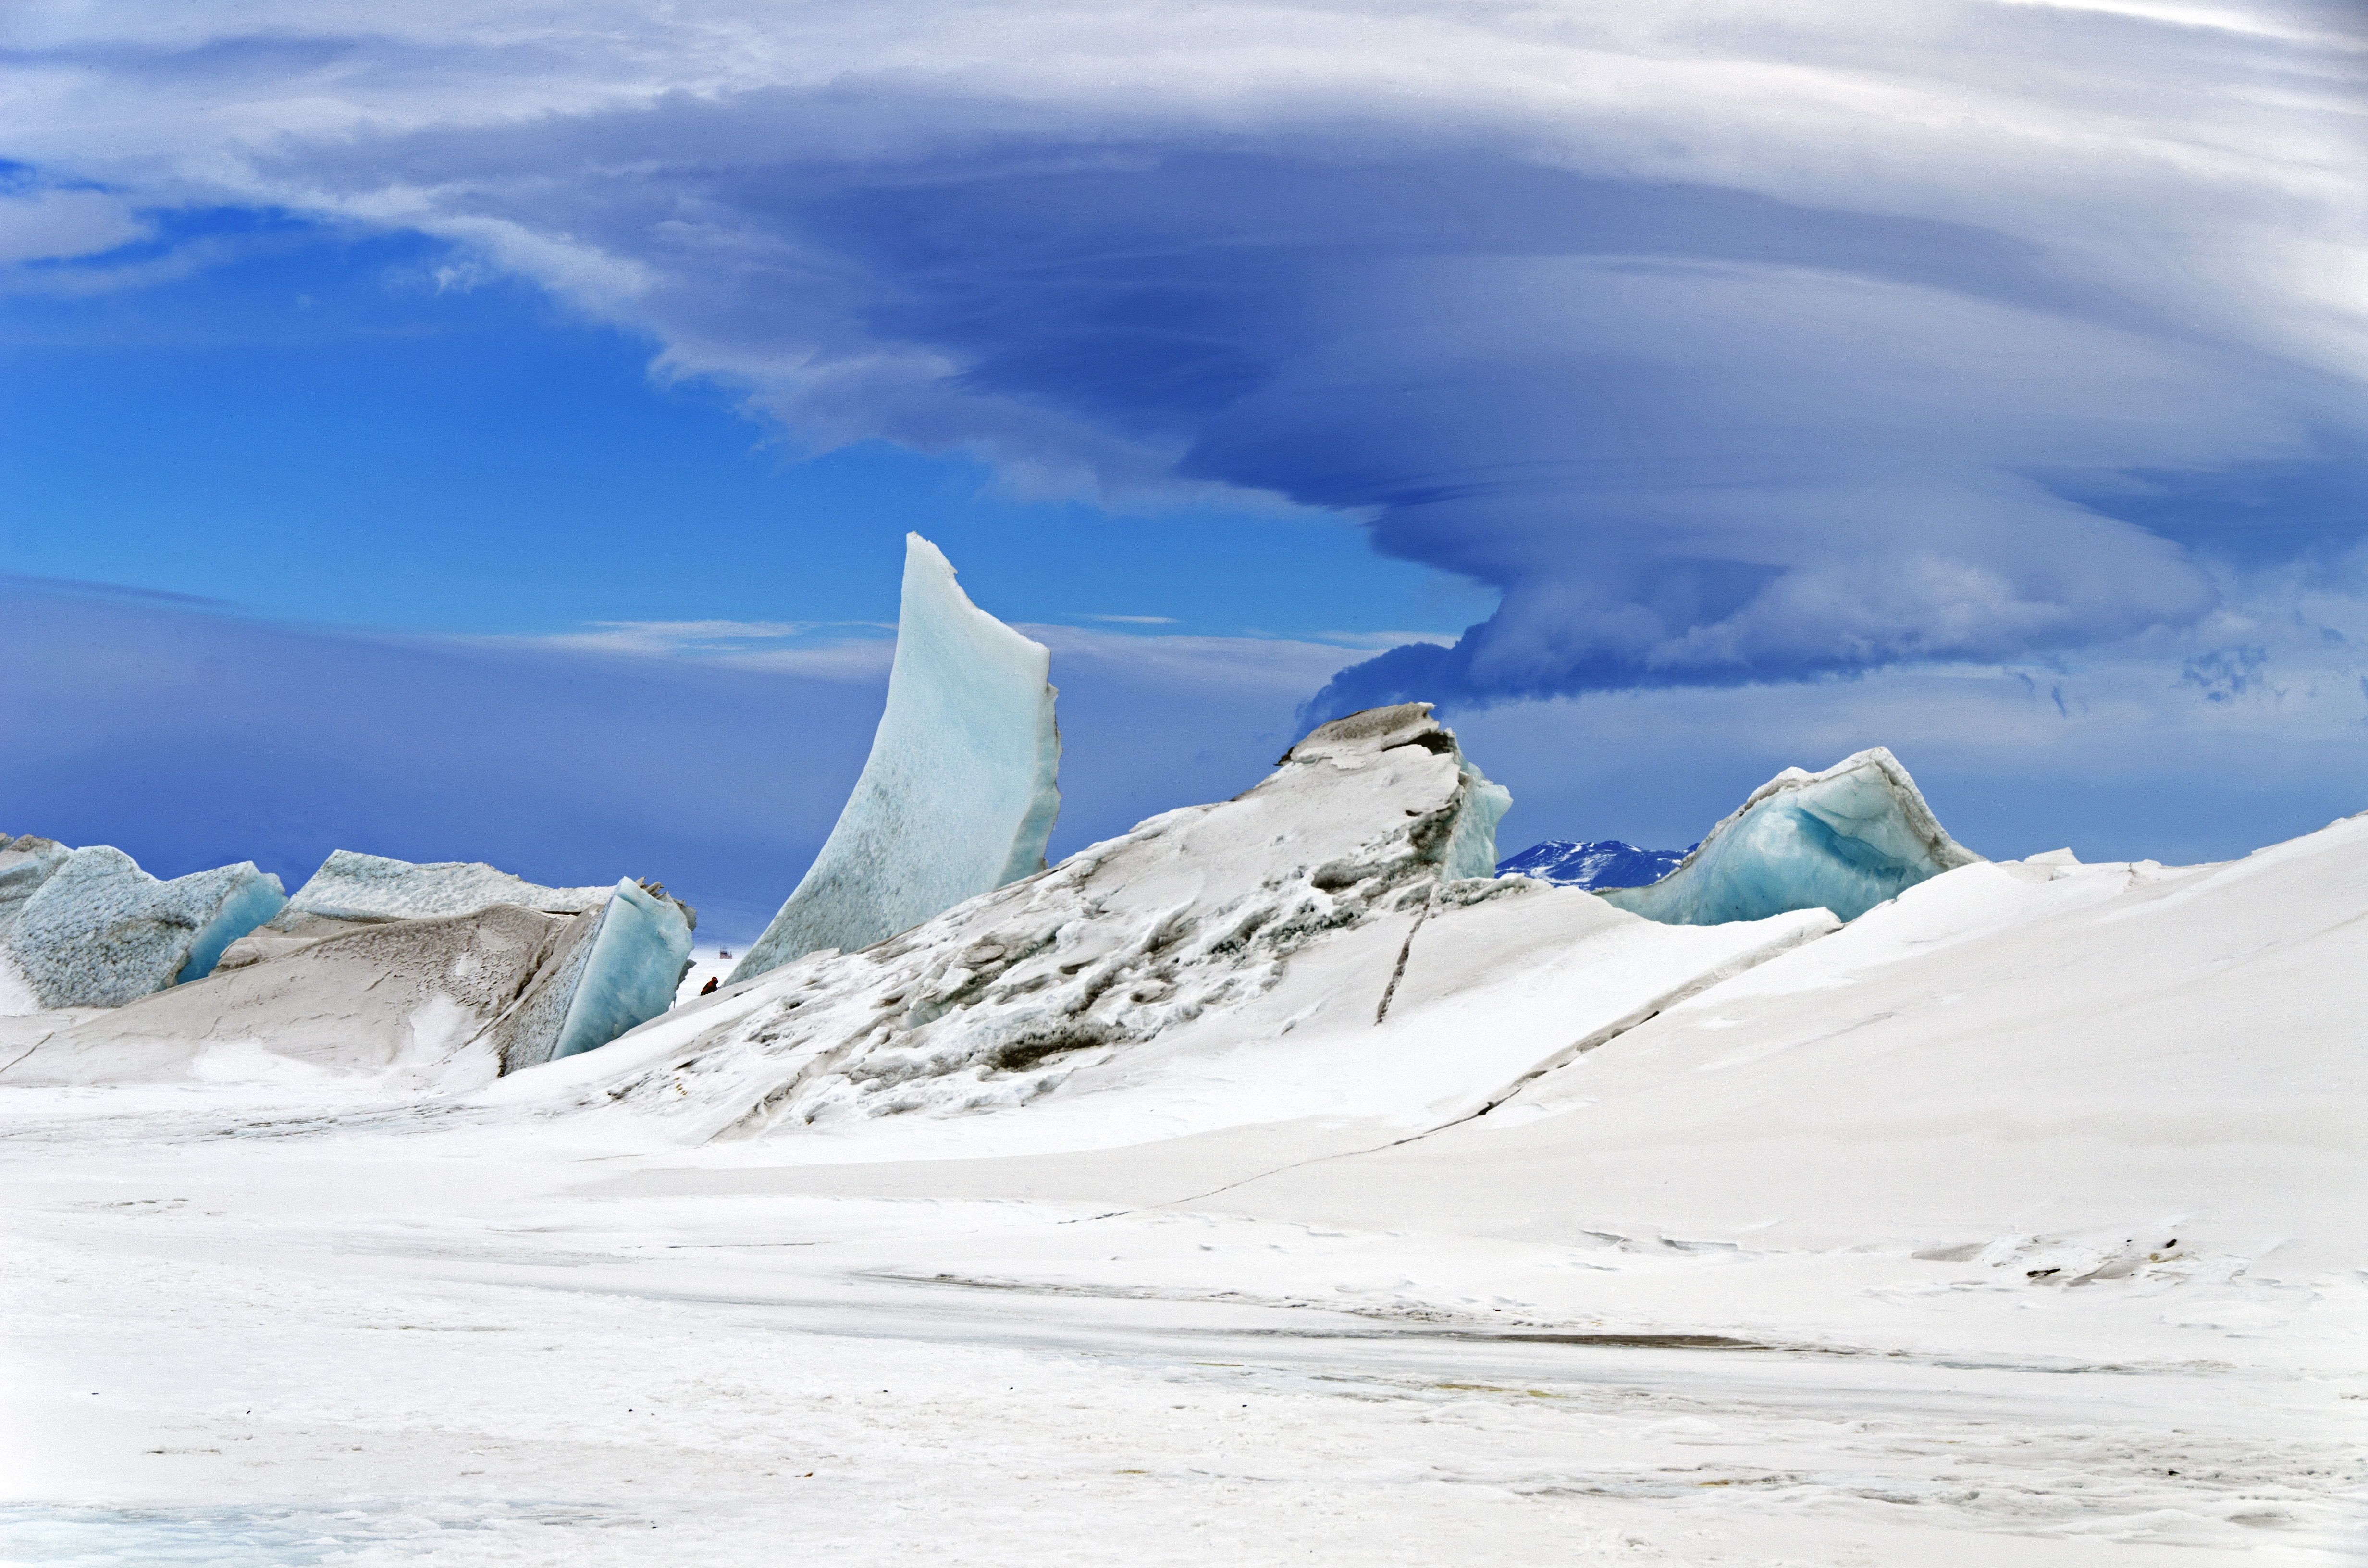 Cool Question: Why Are Some Glaciers Blue?